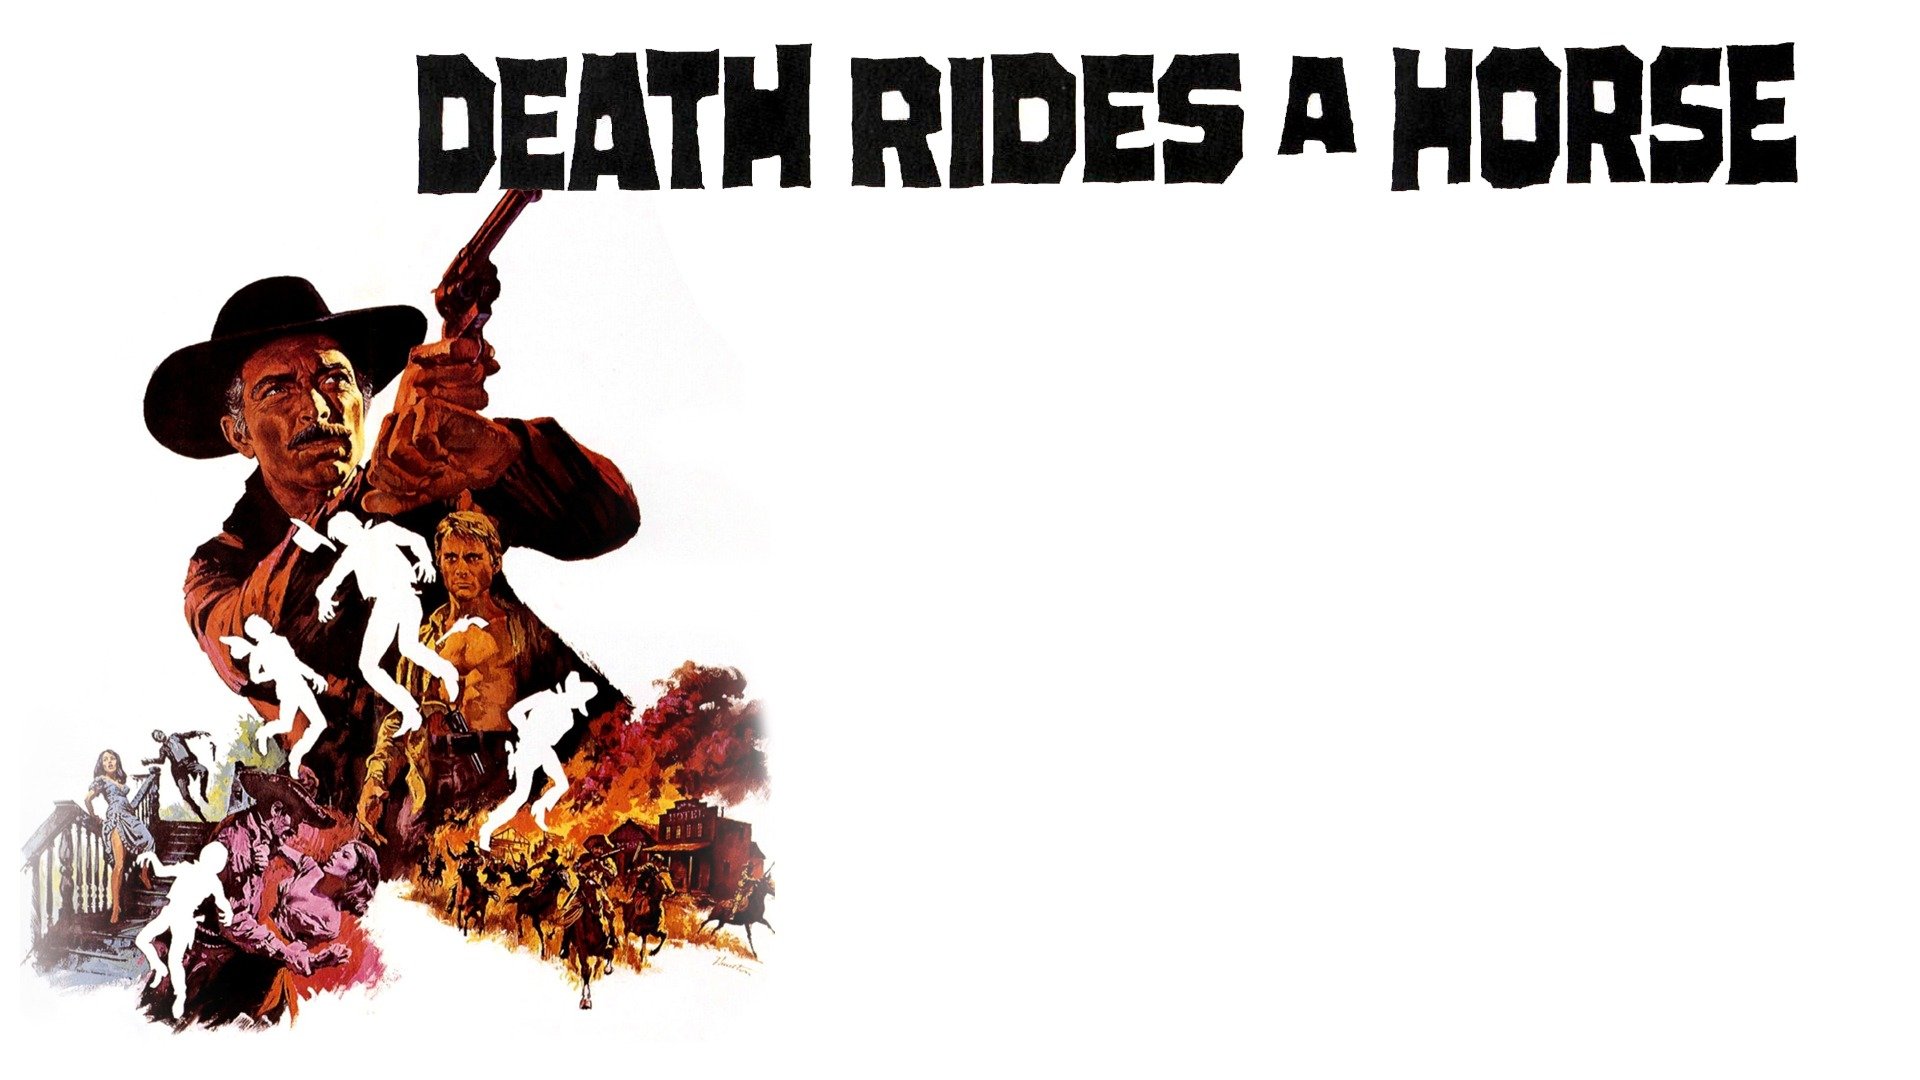 35-facts-about-the-movie-death-rides-a-horse